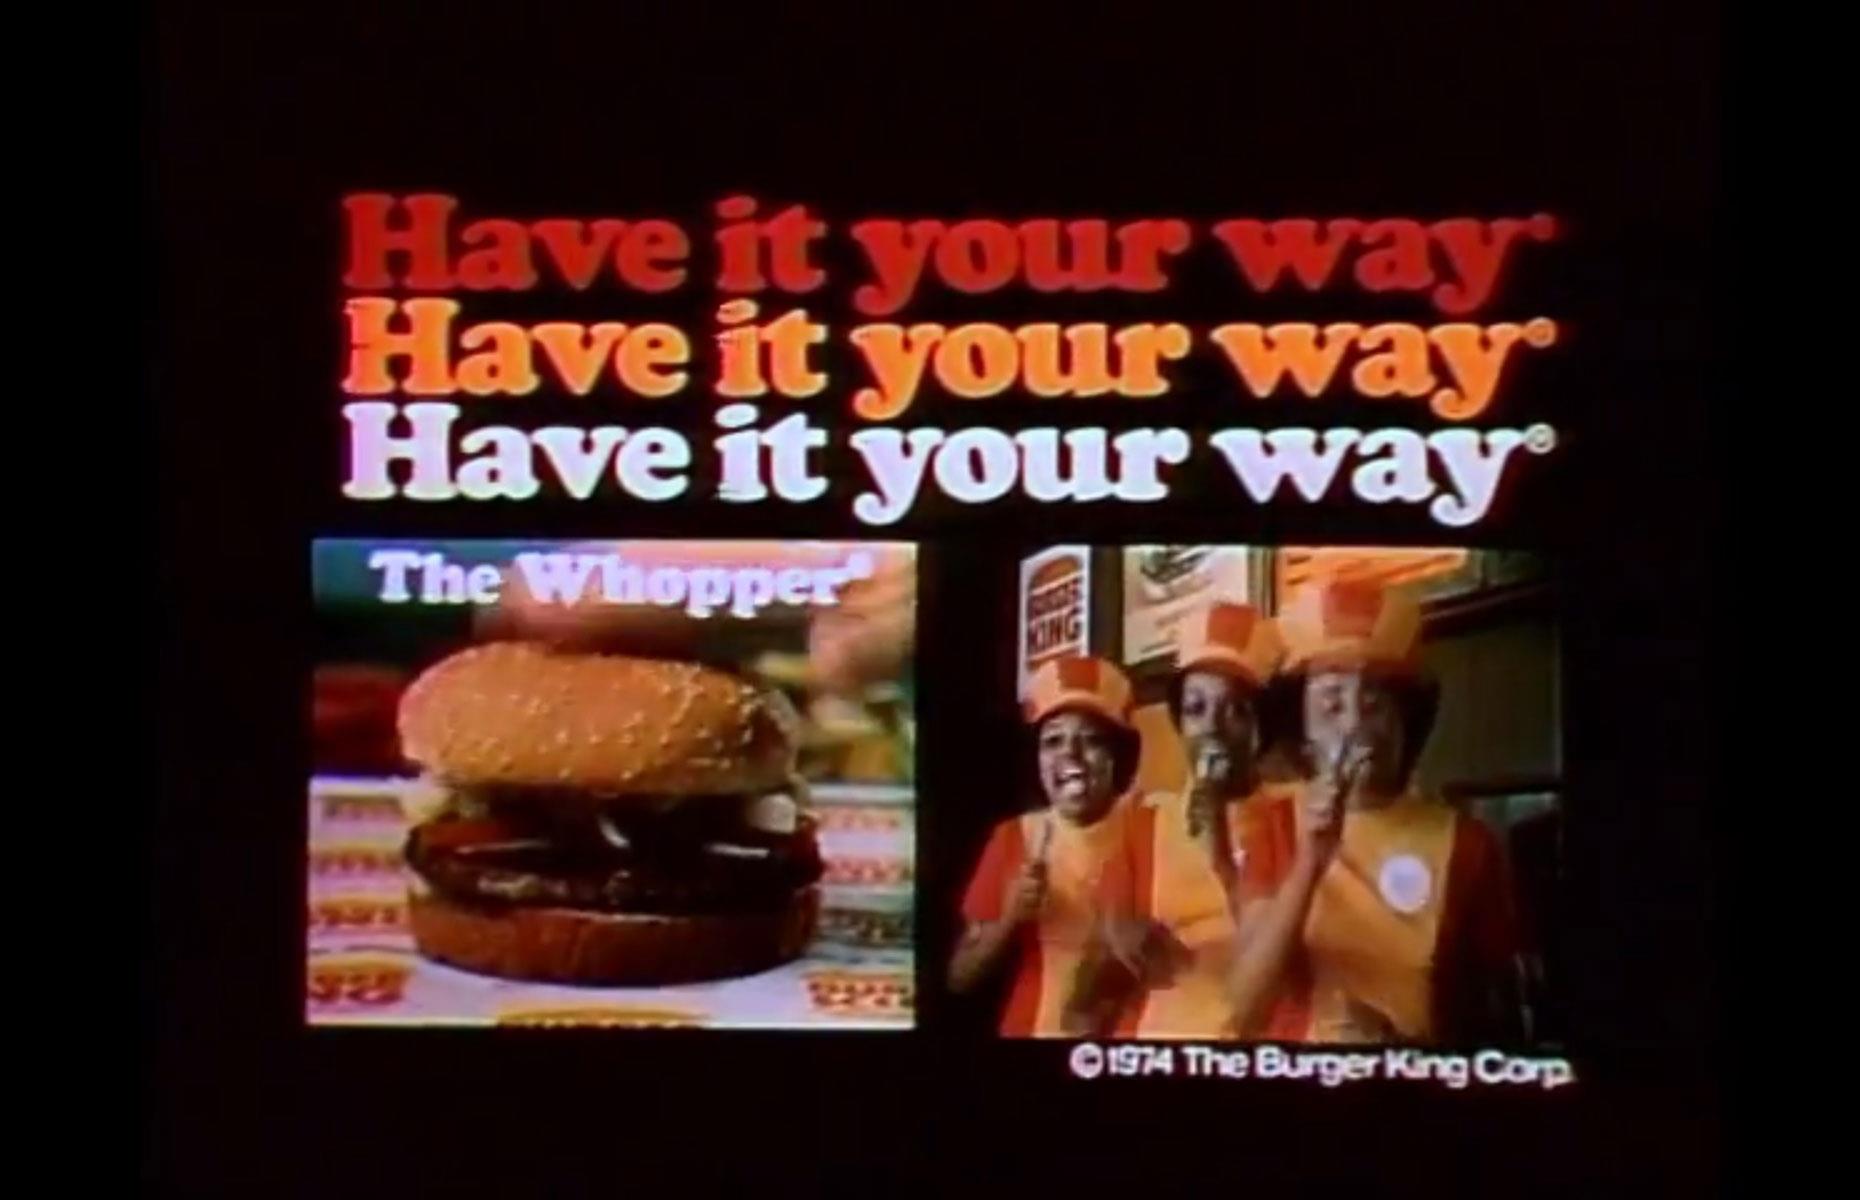 Have it your way – Burger King